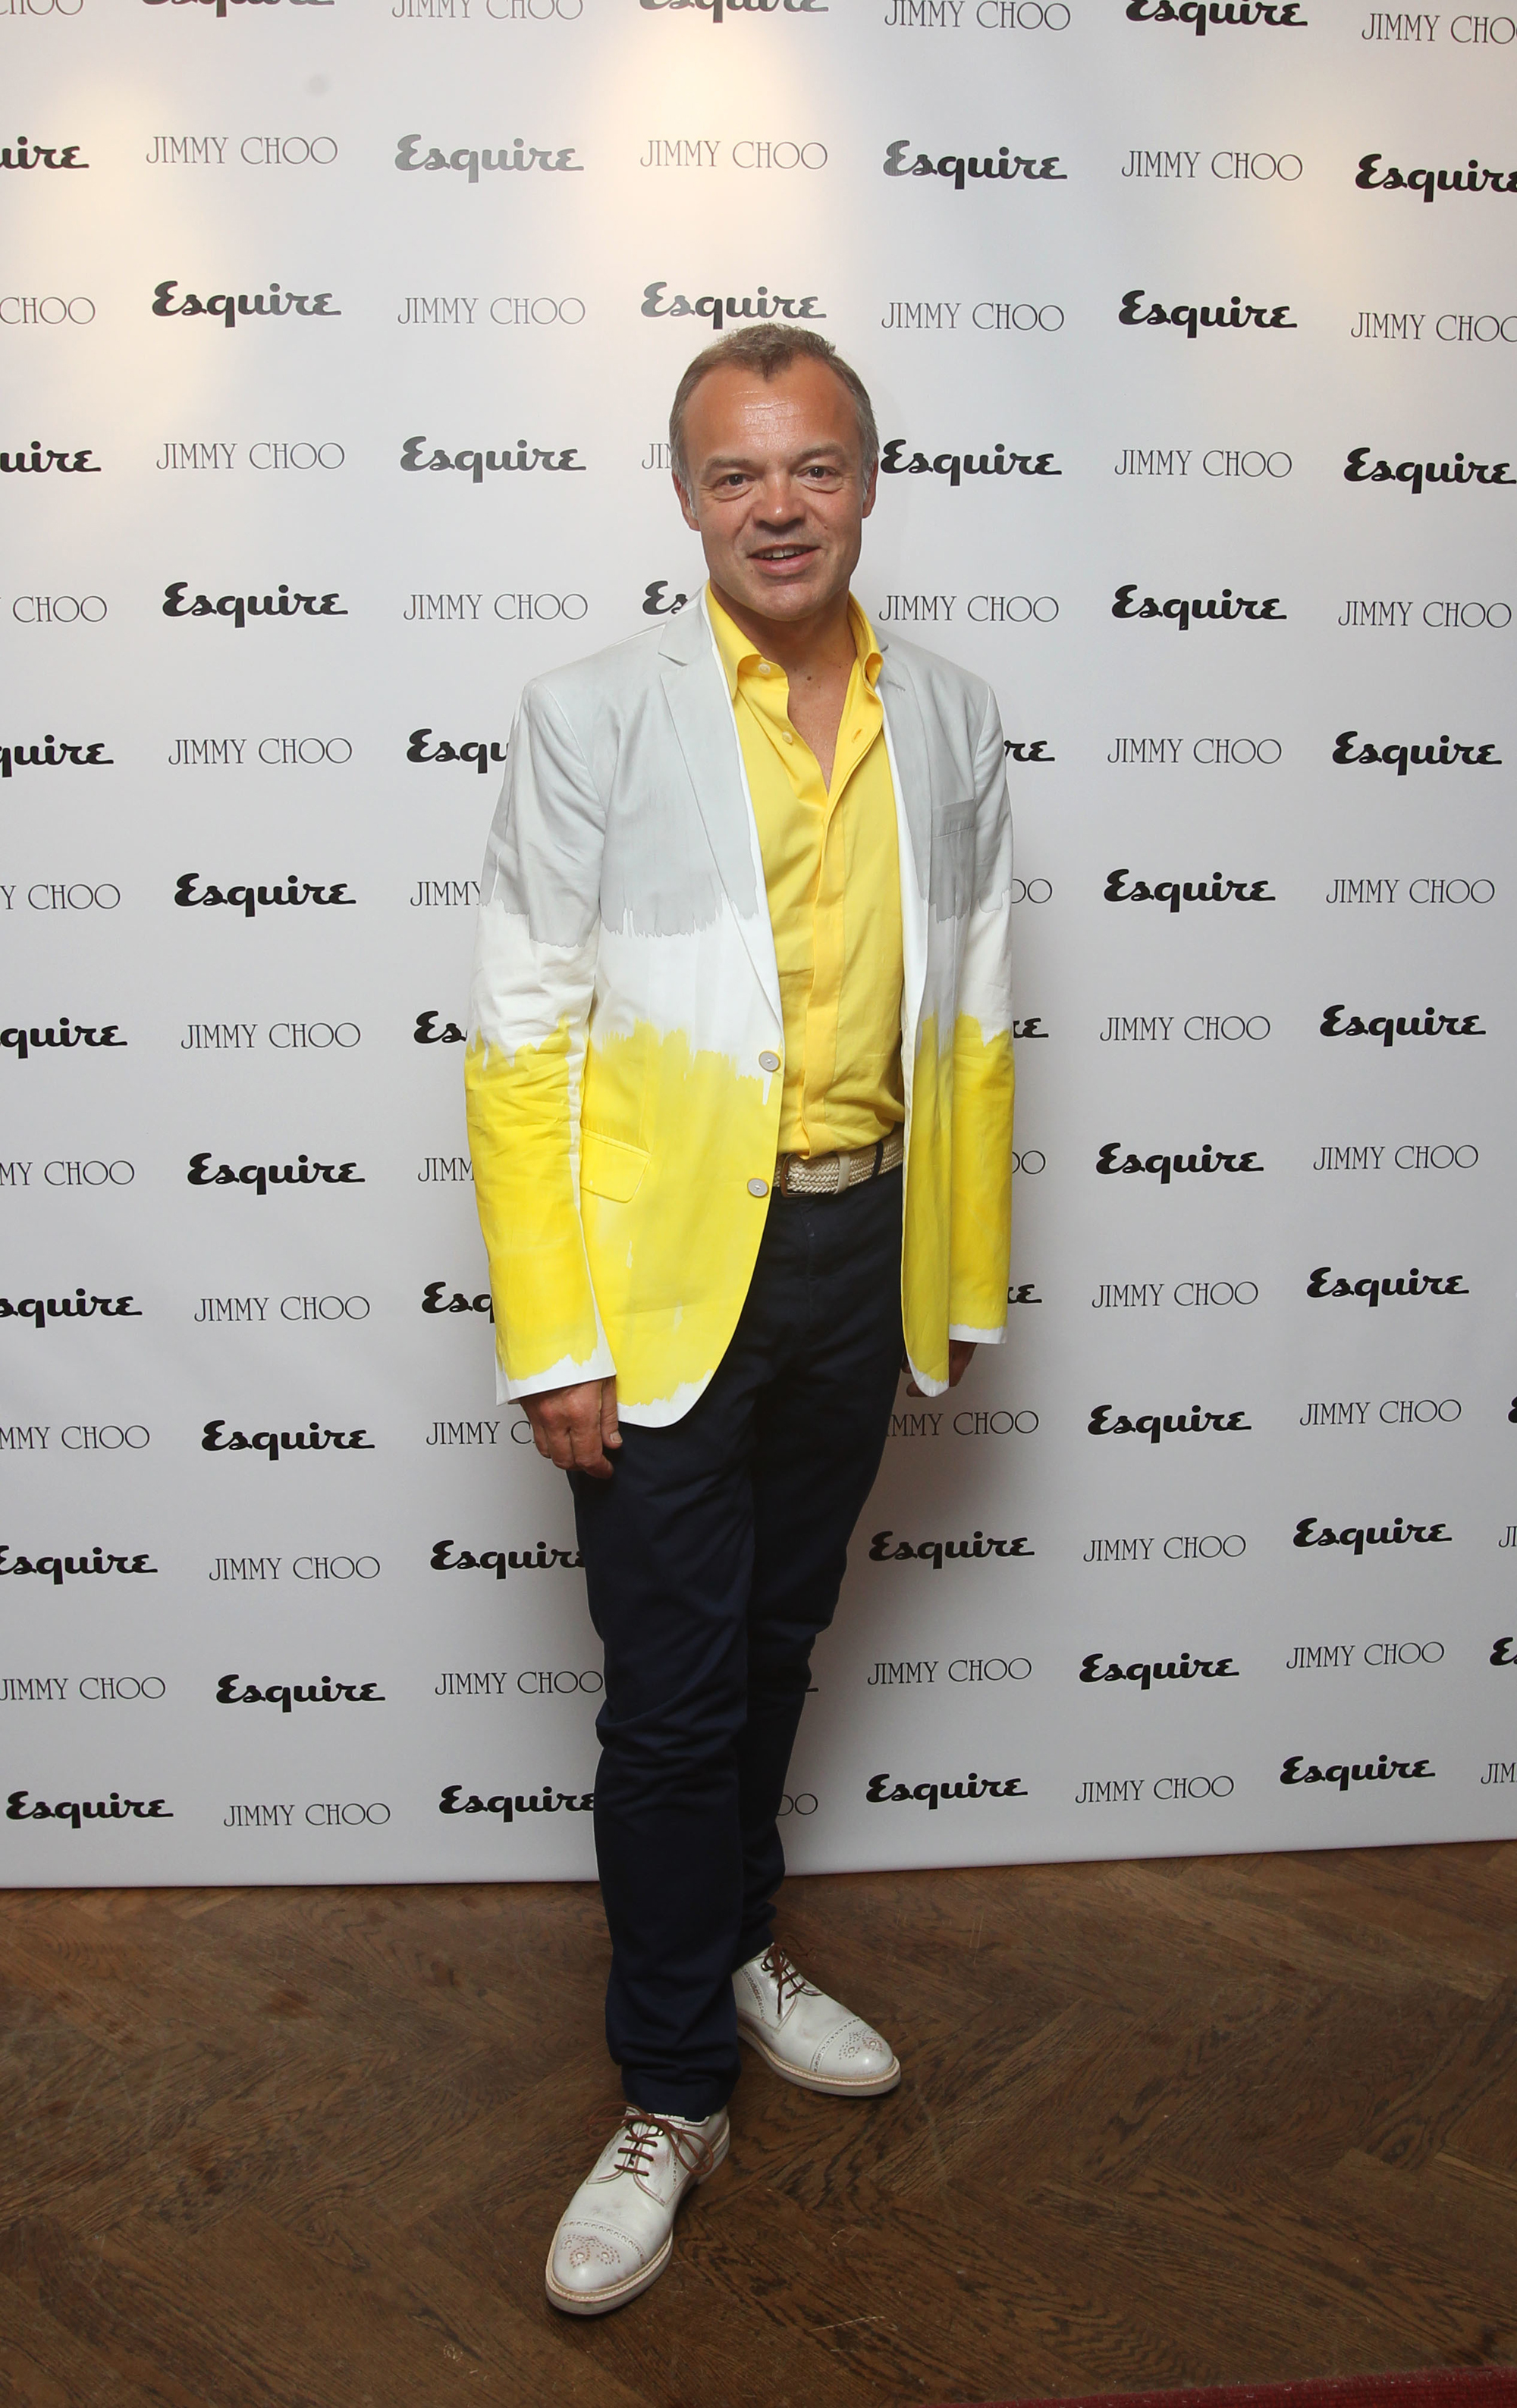 Graham Norton attends the Jimmy Choo and Esquire London Collections: Men opening night party in 2013